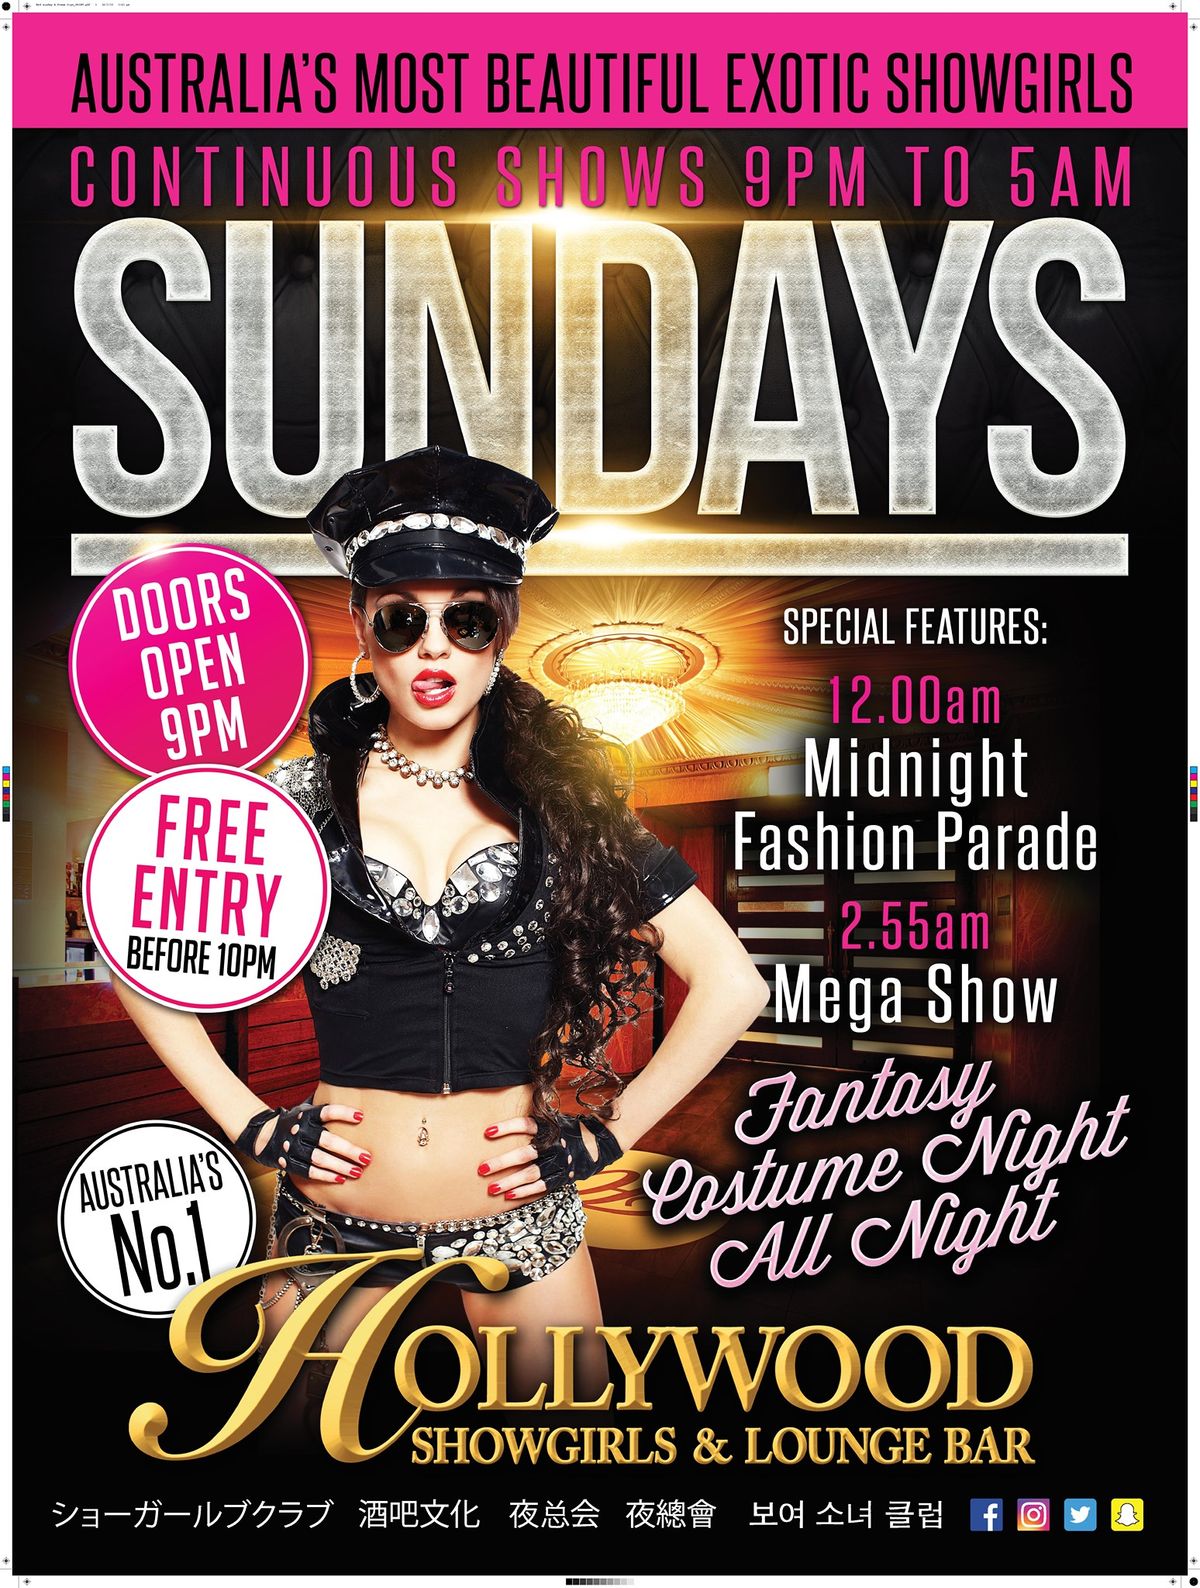 Saucy Sunday's at Hollywood Showgirls